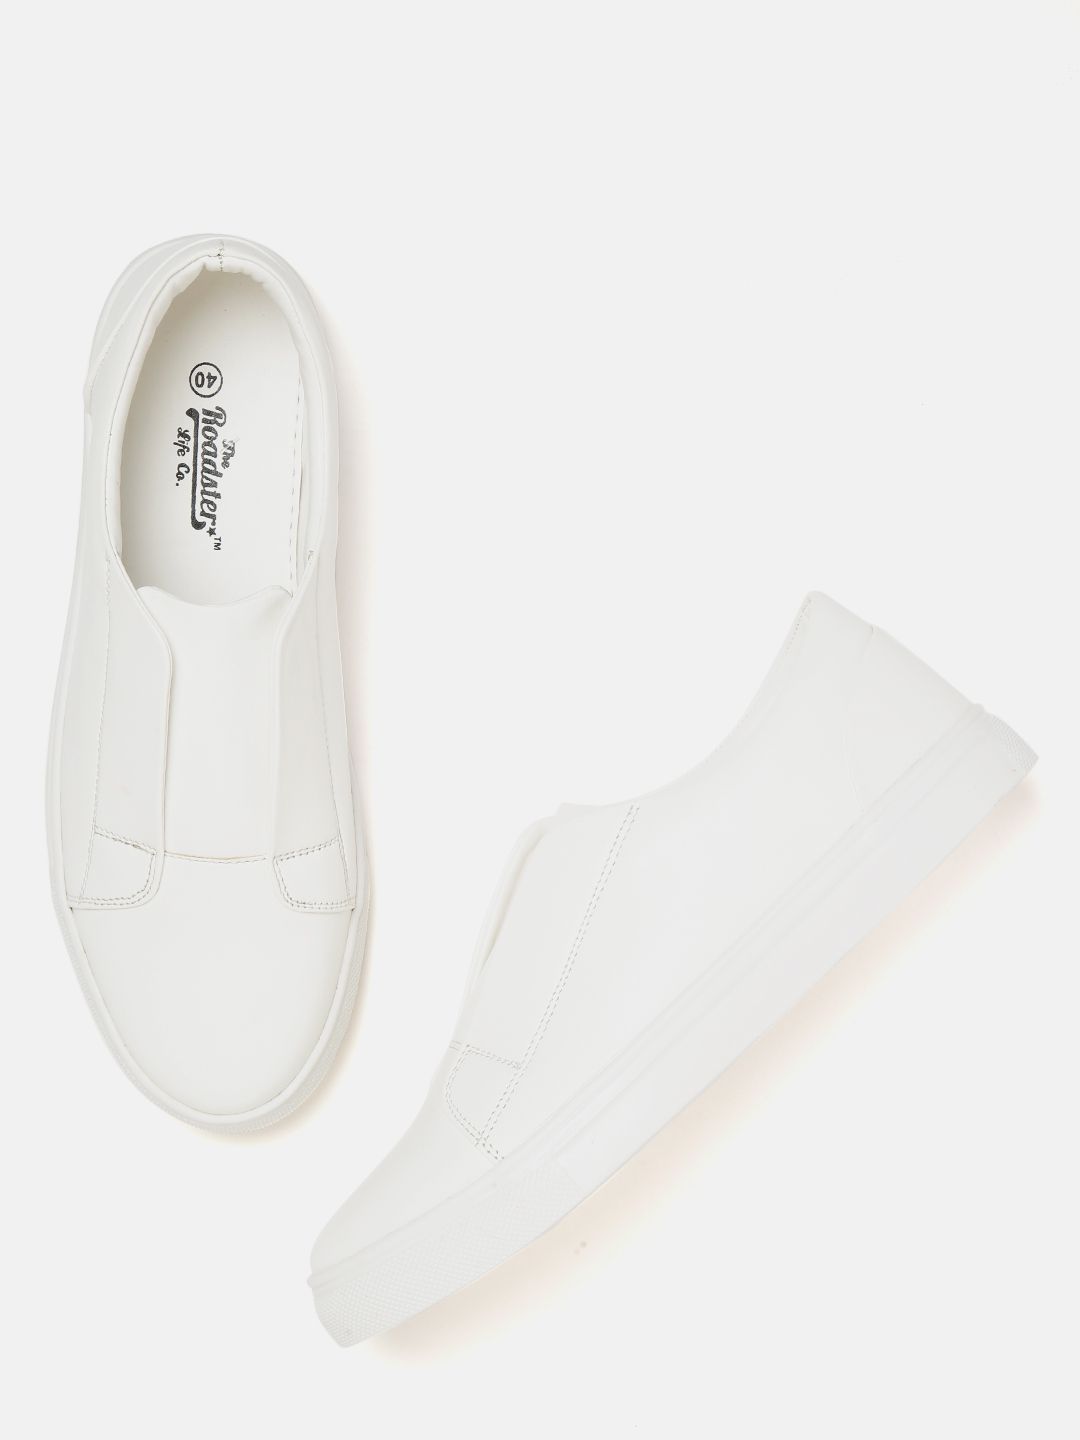 The Roadster Lifestyle Co Women White Slip-On Sneakers Price in India